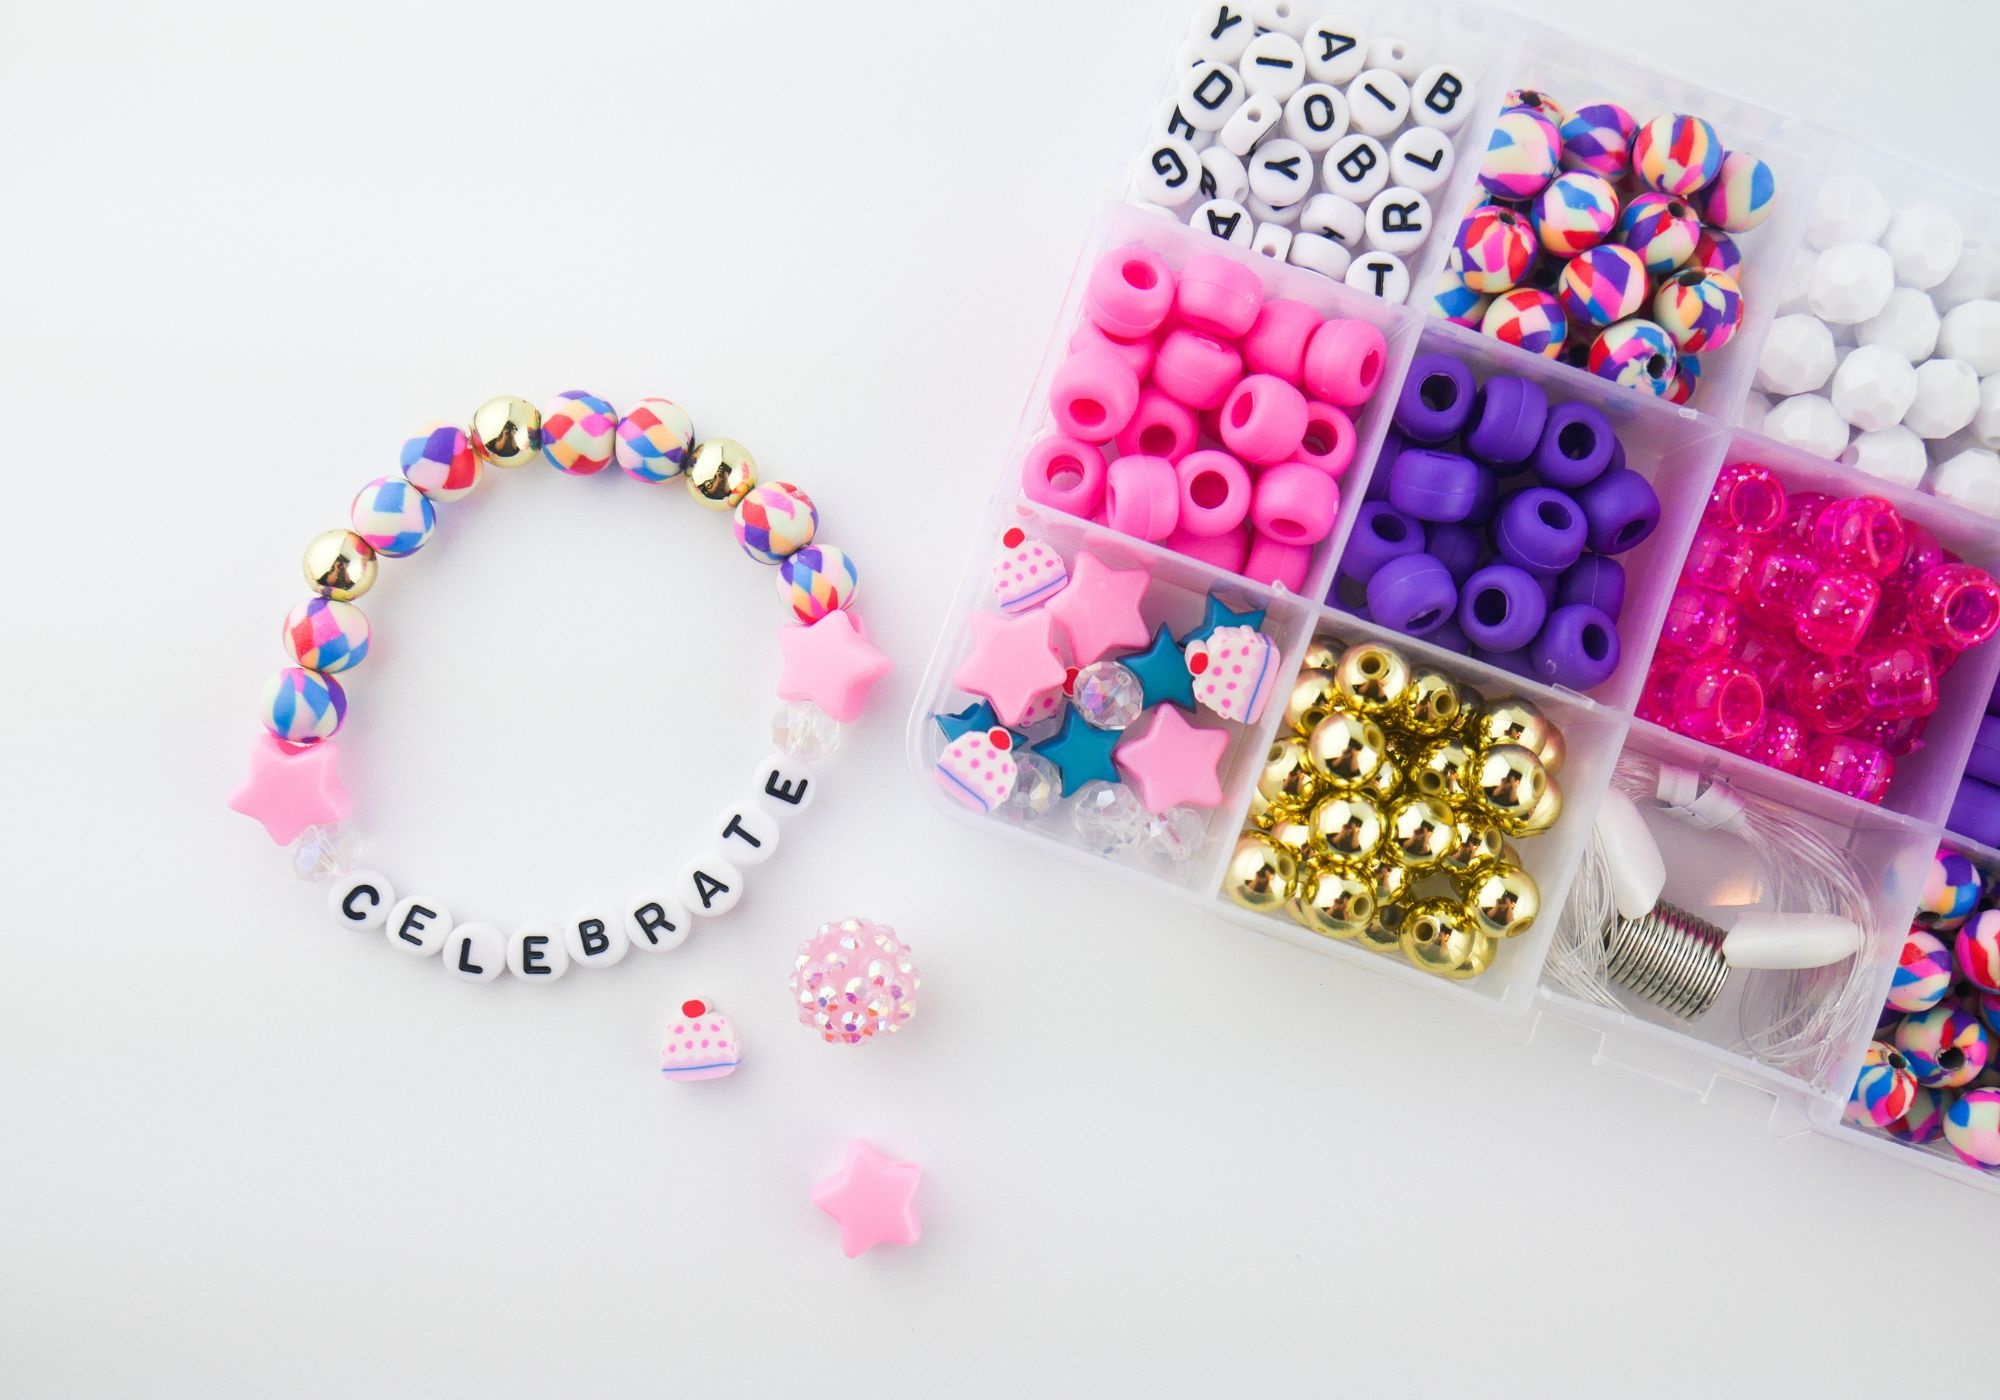 12 Bracelet Ideas to Make with Your Kids - Craft projects for every fan!